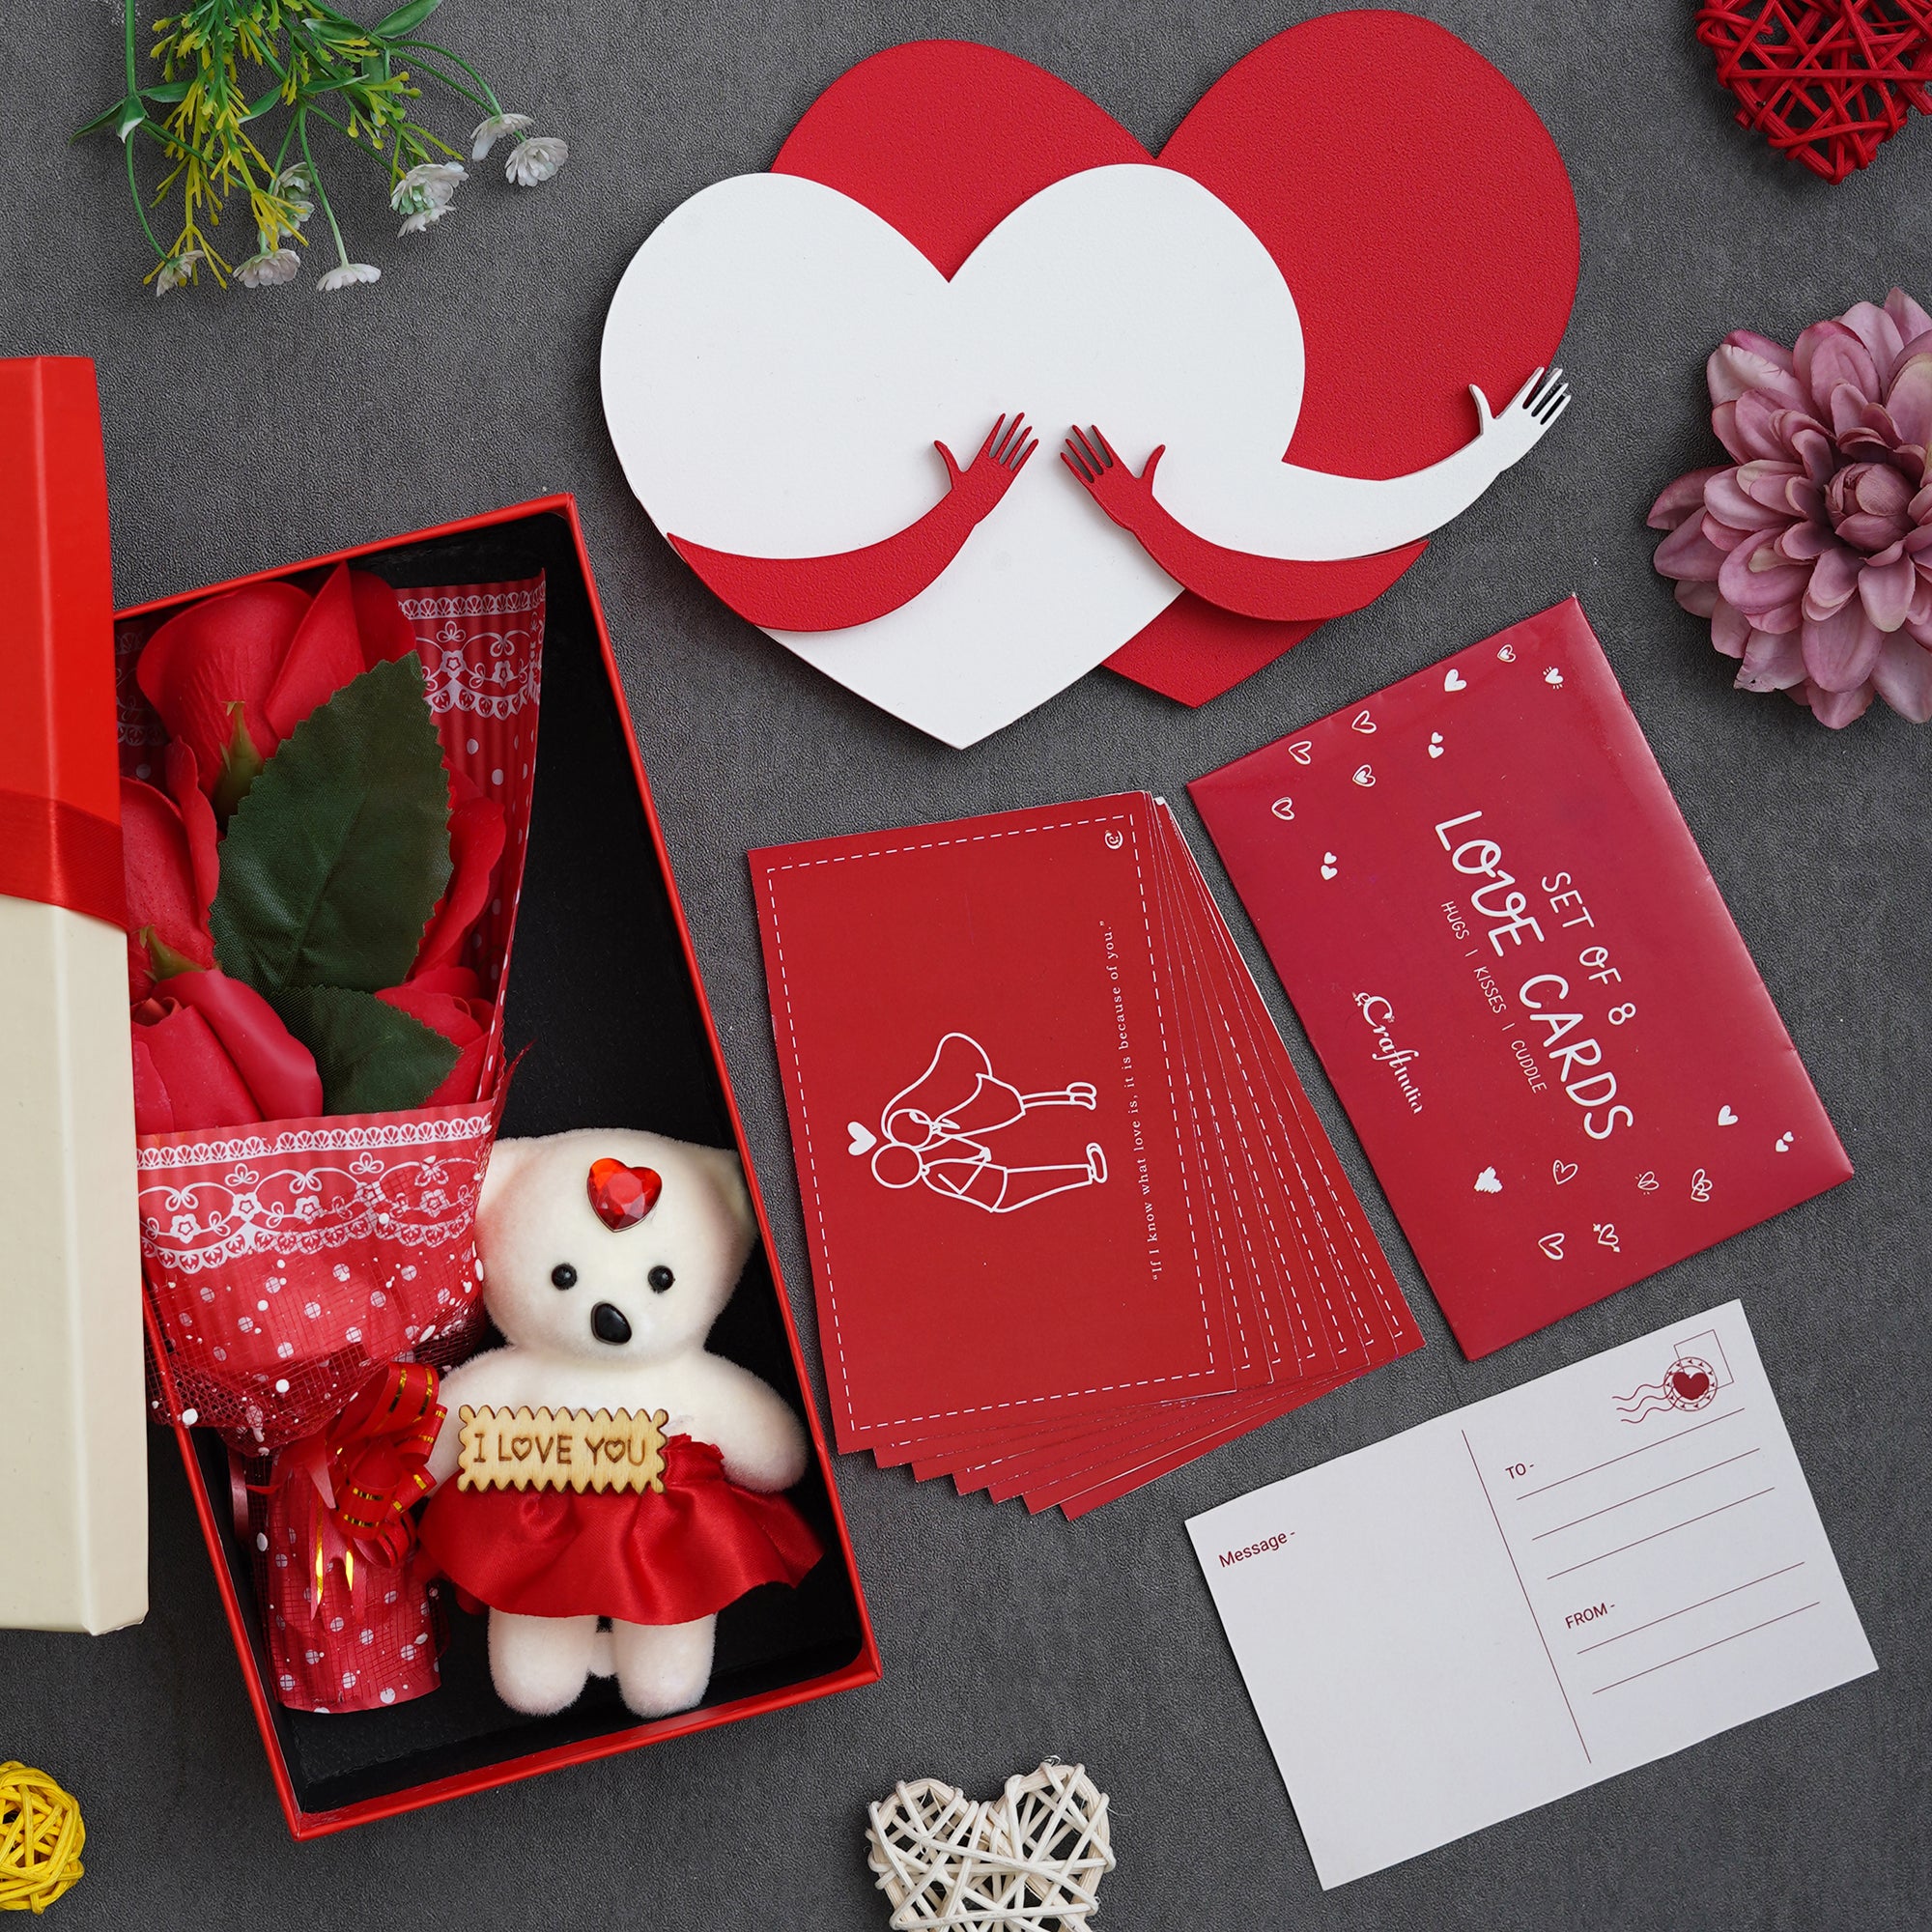 Valentine Combo of Pack of 8 Love Gift Cards, Red and White Heart Hugging Each Other Gift Set, Red Roses Bouquet and White, Red Teddy Bear Valentine's Rectangle Shaped Gift Box